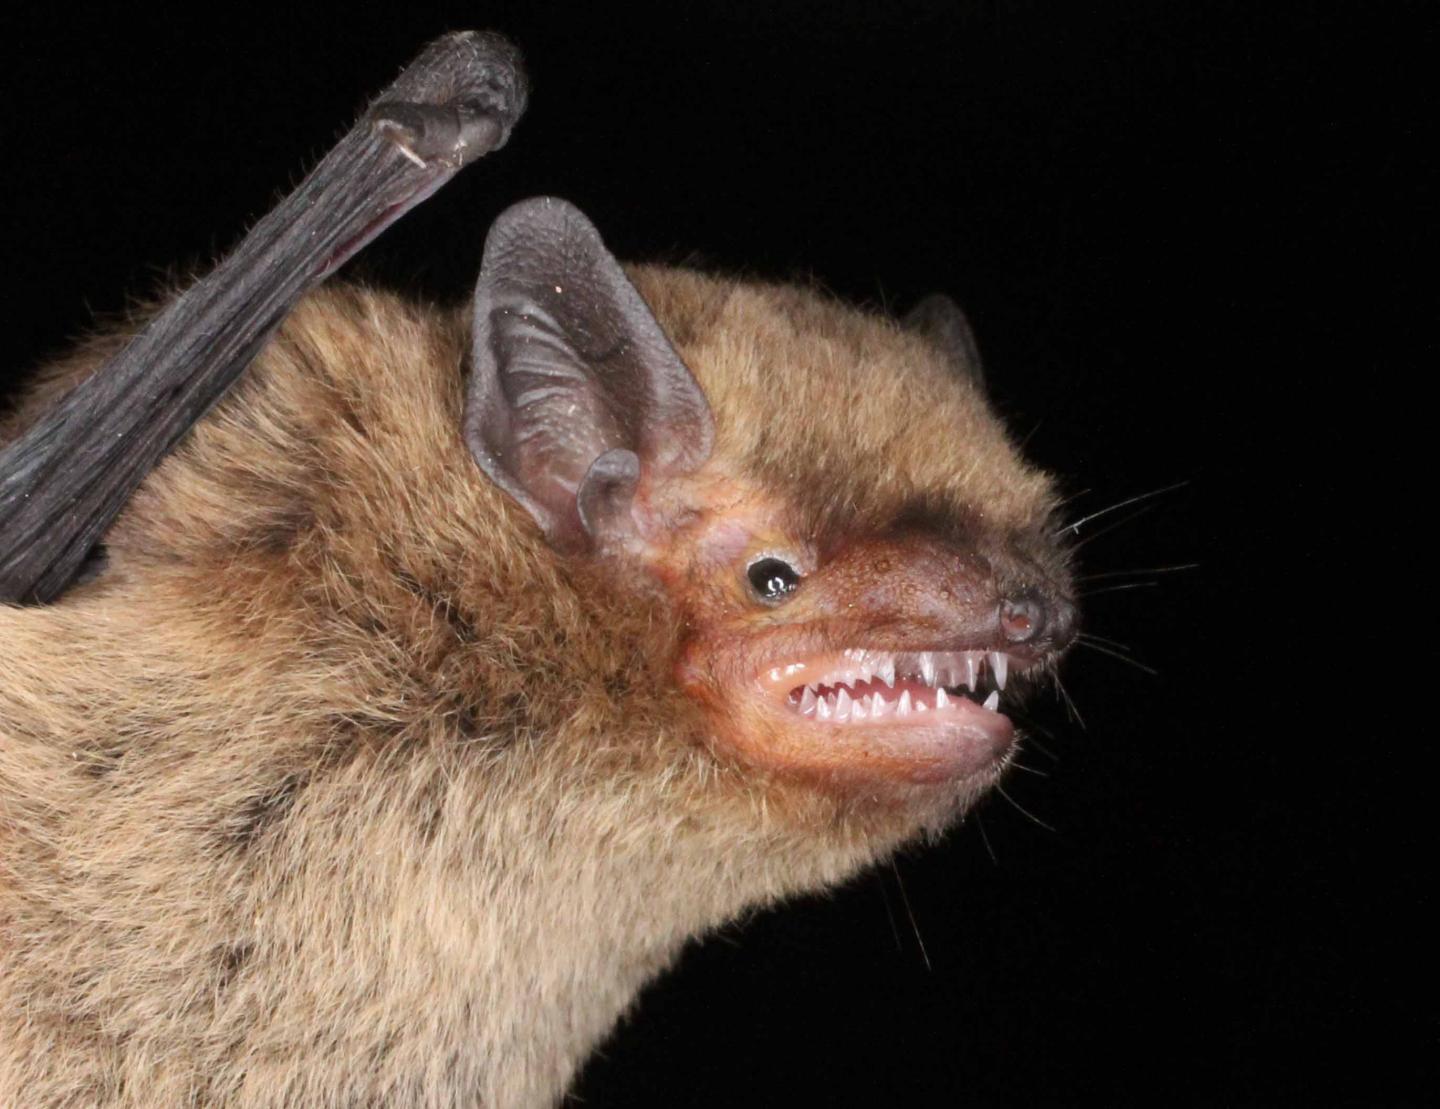 Nathusius and Soprano Bats Are Attracted to Green Light